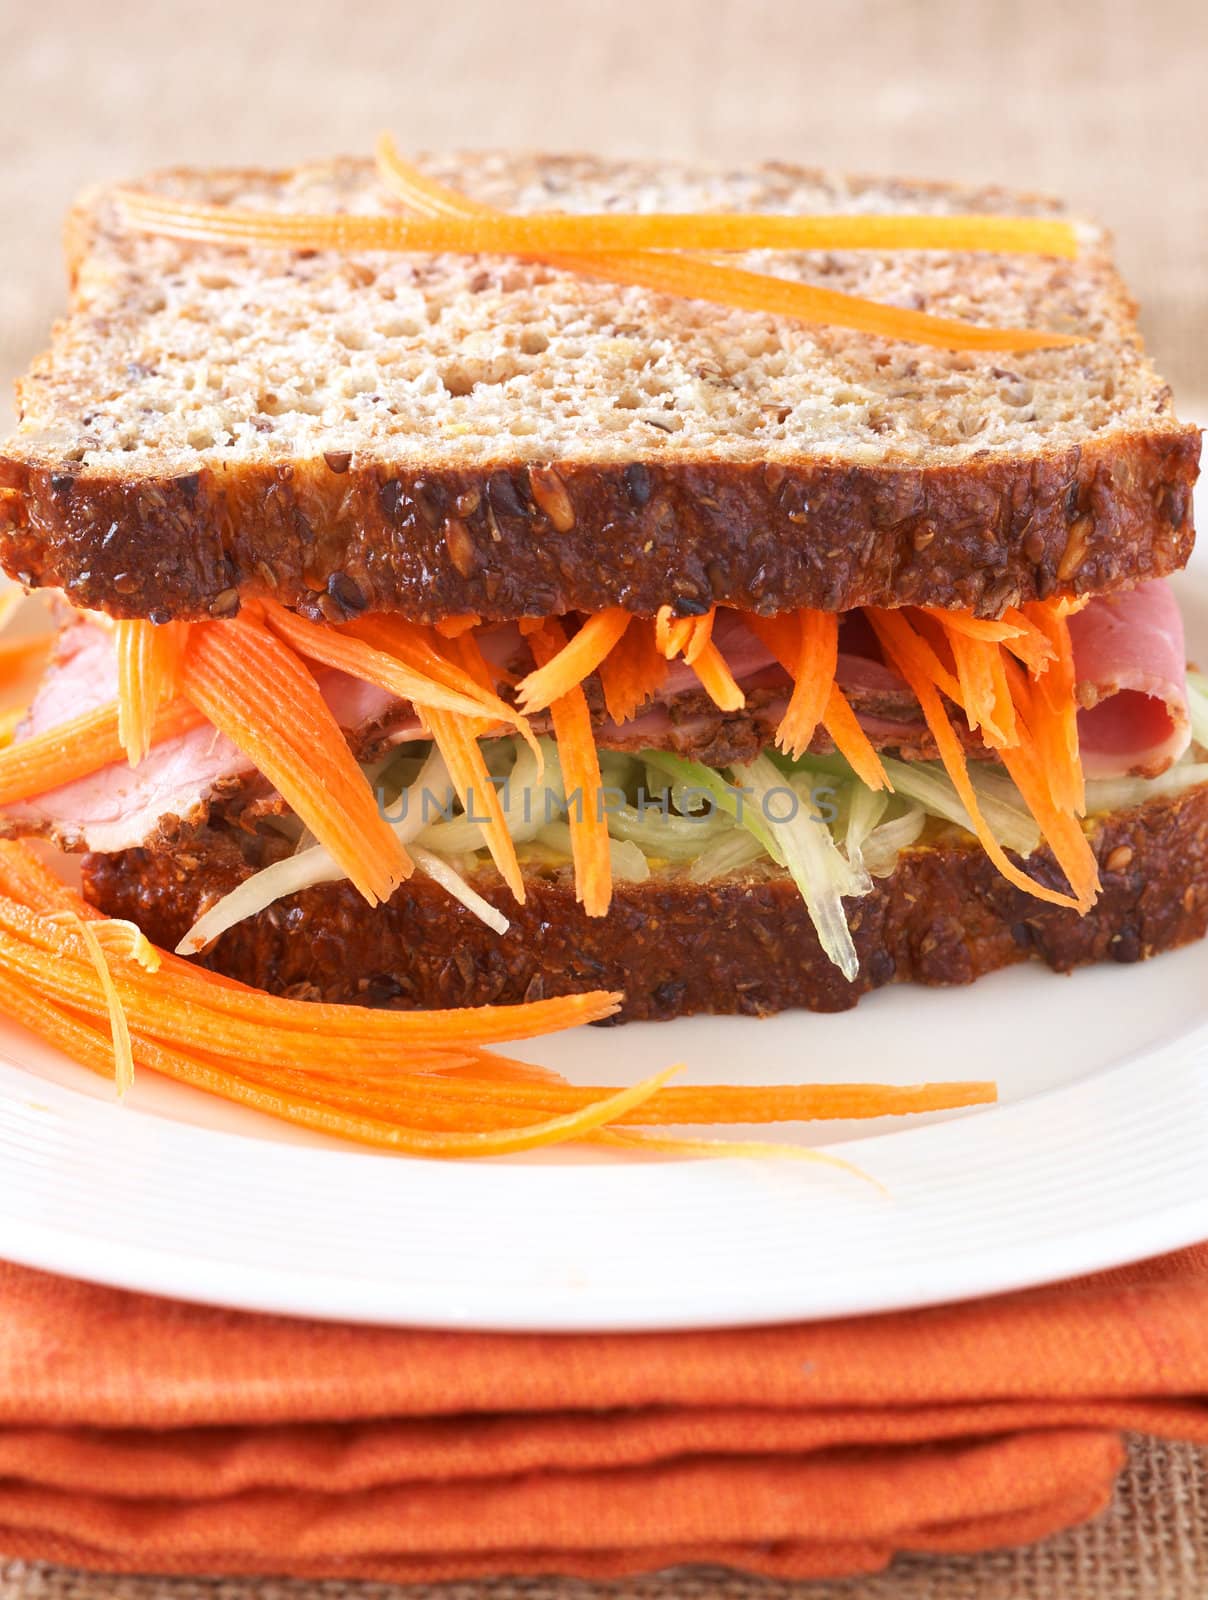 Tasty open sandwich with cucumber relish, smoked beef pastrami and sliced carrots on wholewheat bread 